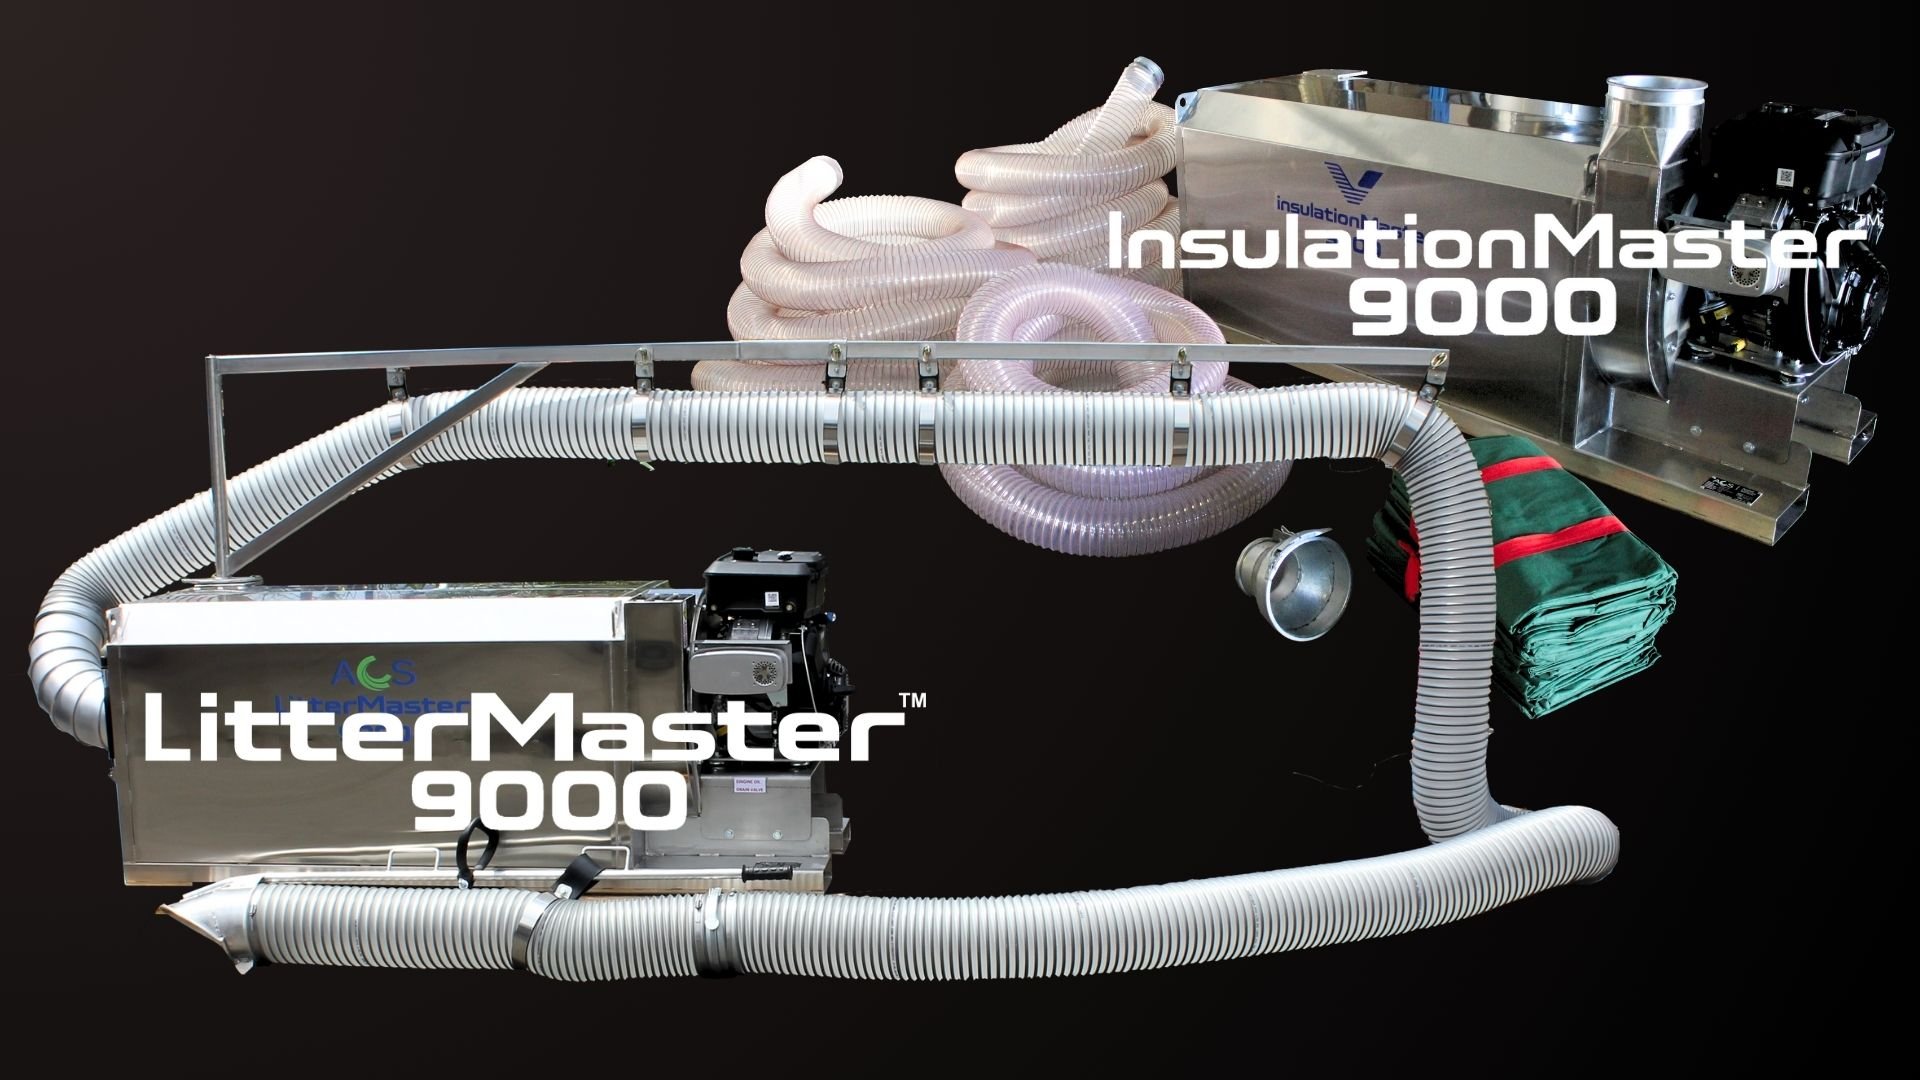 Insulation and leaf litter vacuum system Insulation master 9000 and Litter Master 9000